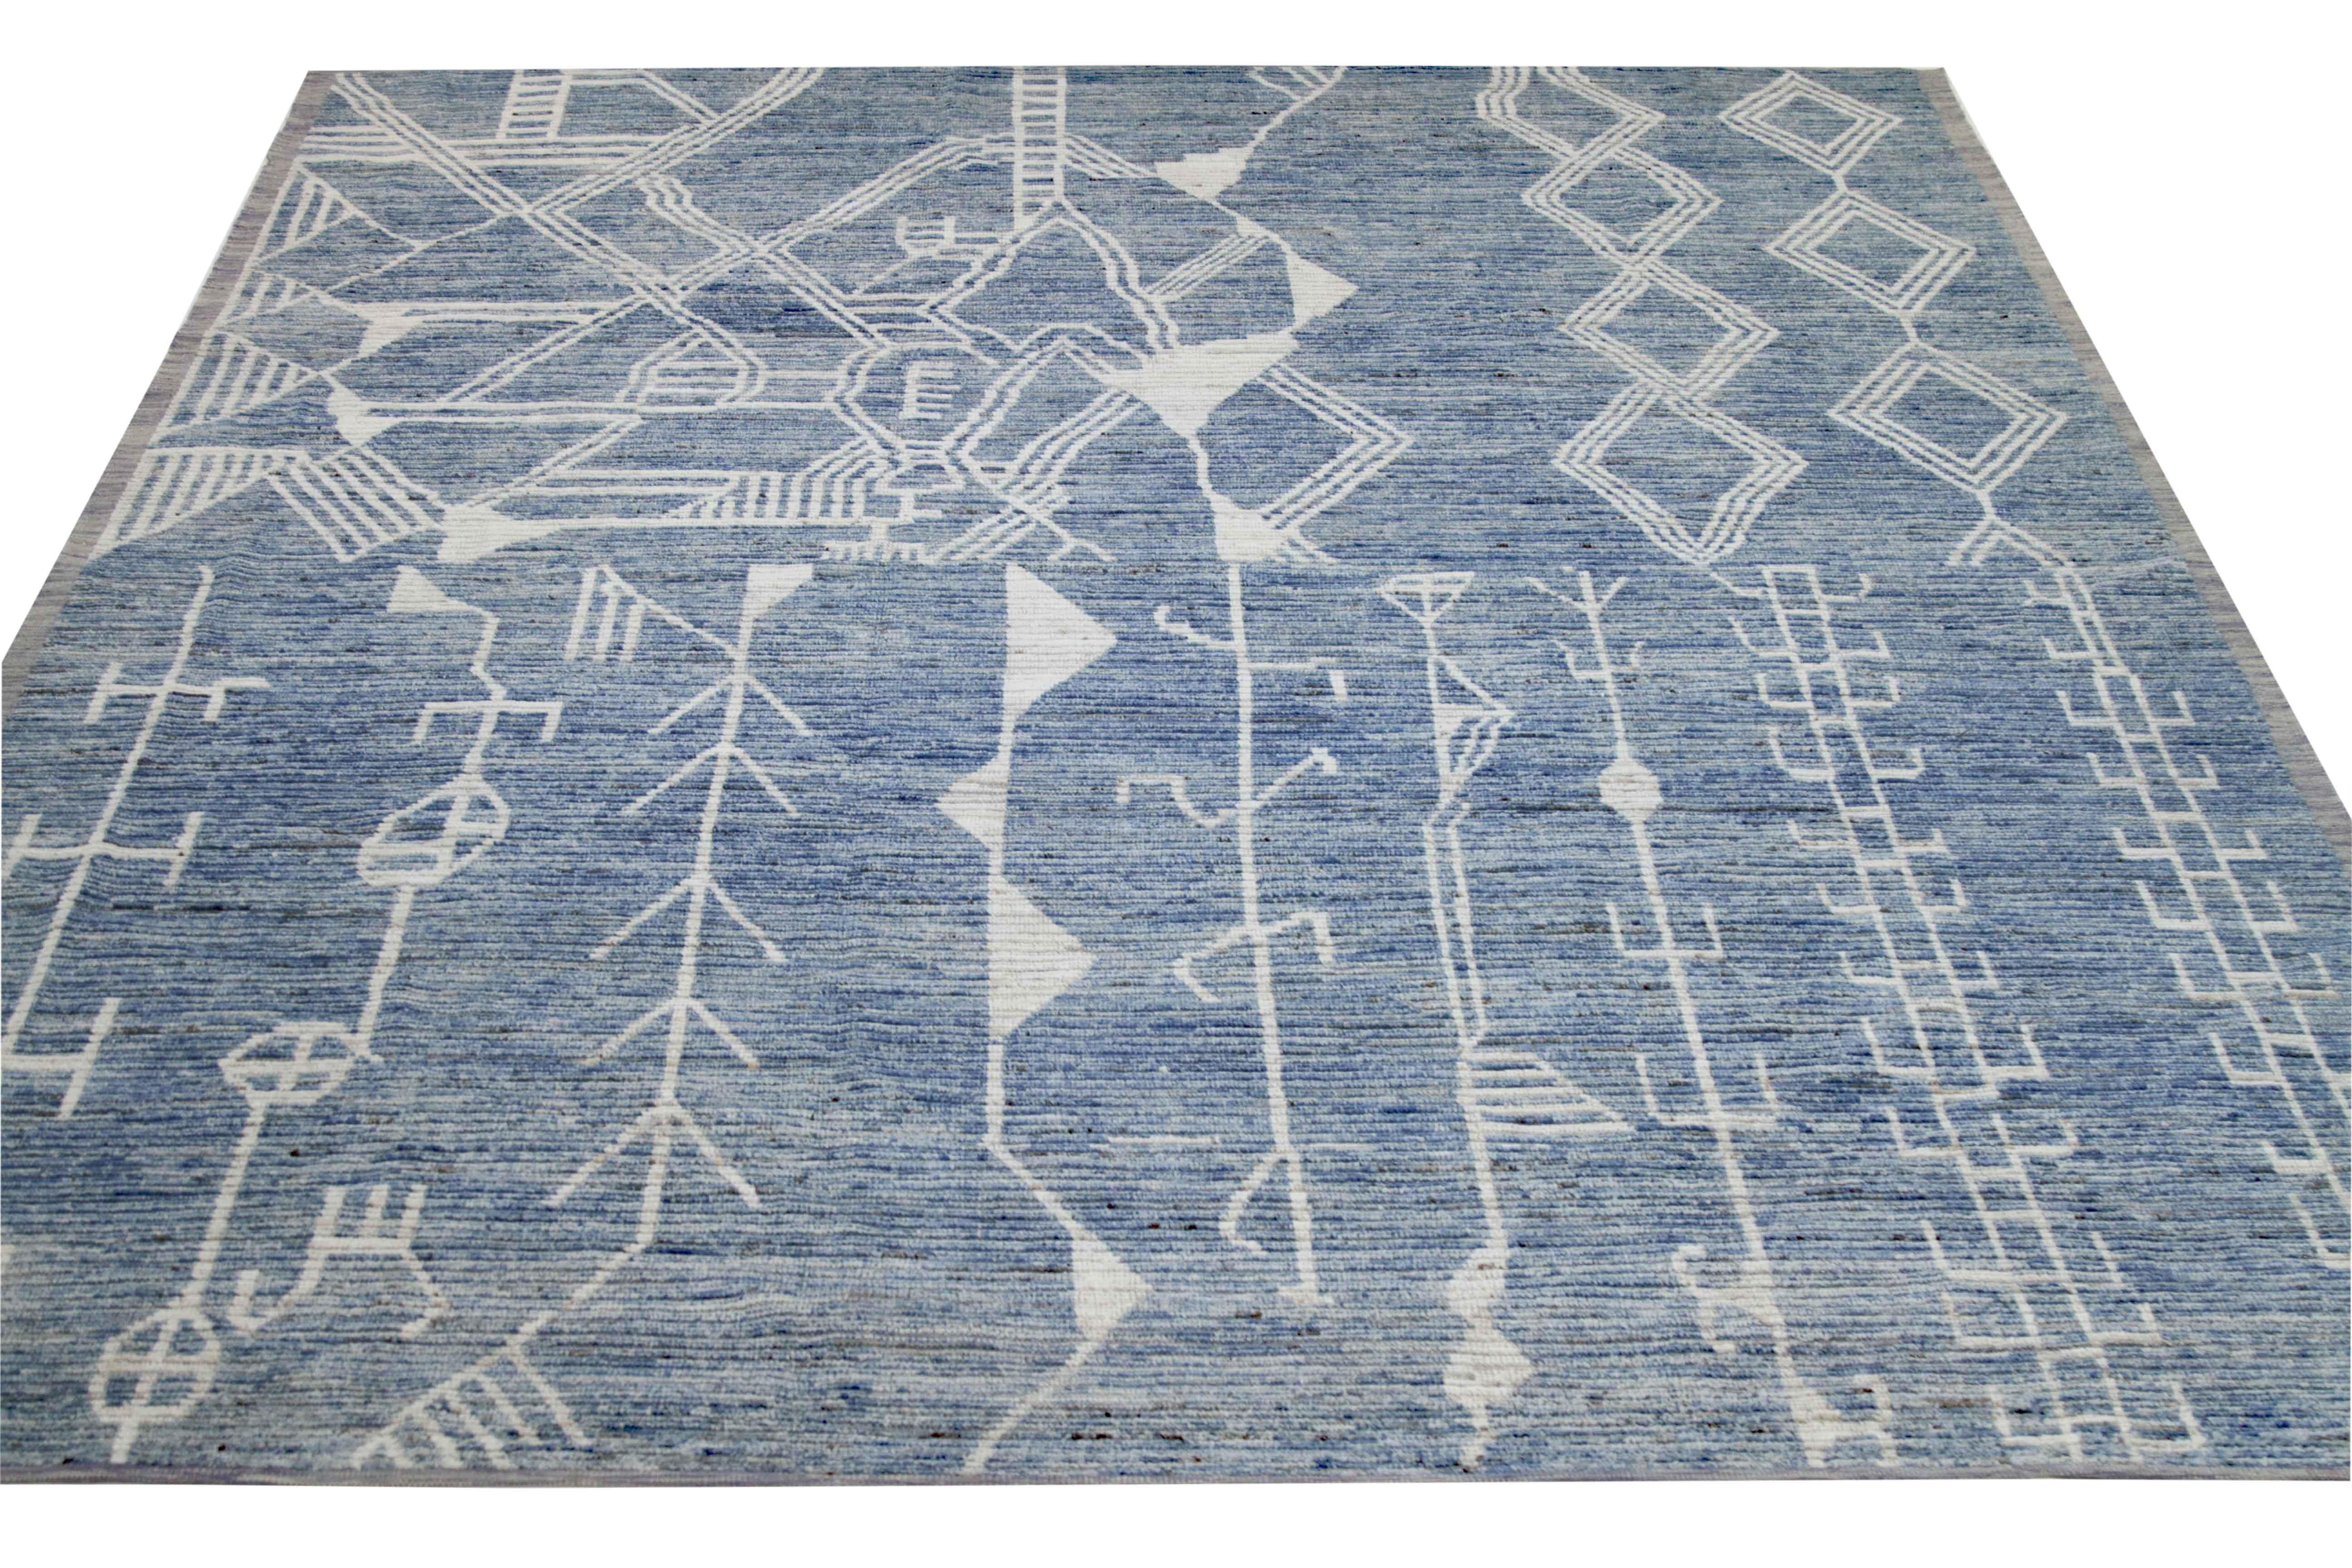 Modern Afghan rug handwoven from the finest sheep’s wool. It’s colored with all-natural vegetable dyes that are safe for humans and pets. This piece is a traditional Afghan weaving featuring a Moroccan inspired design. It’s highlighted by ivory